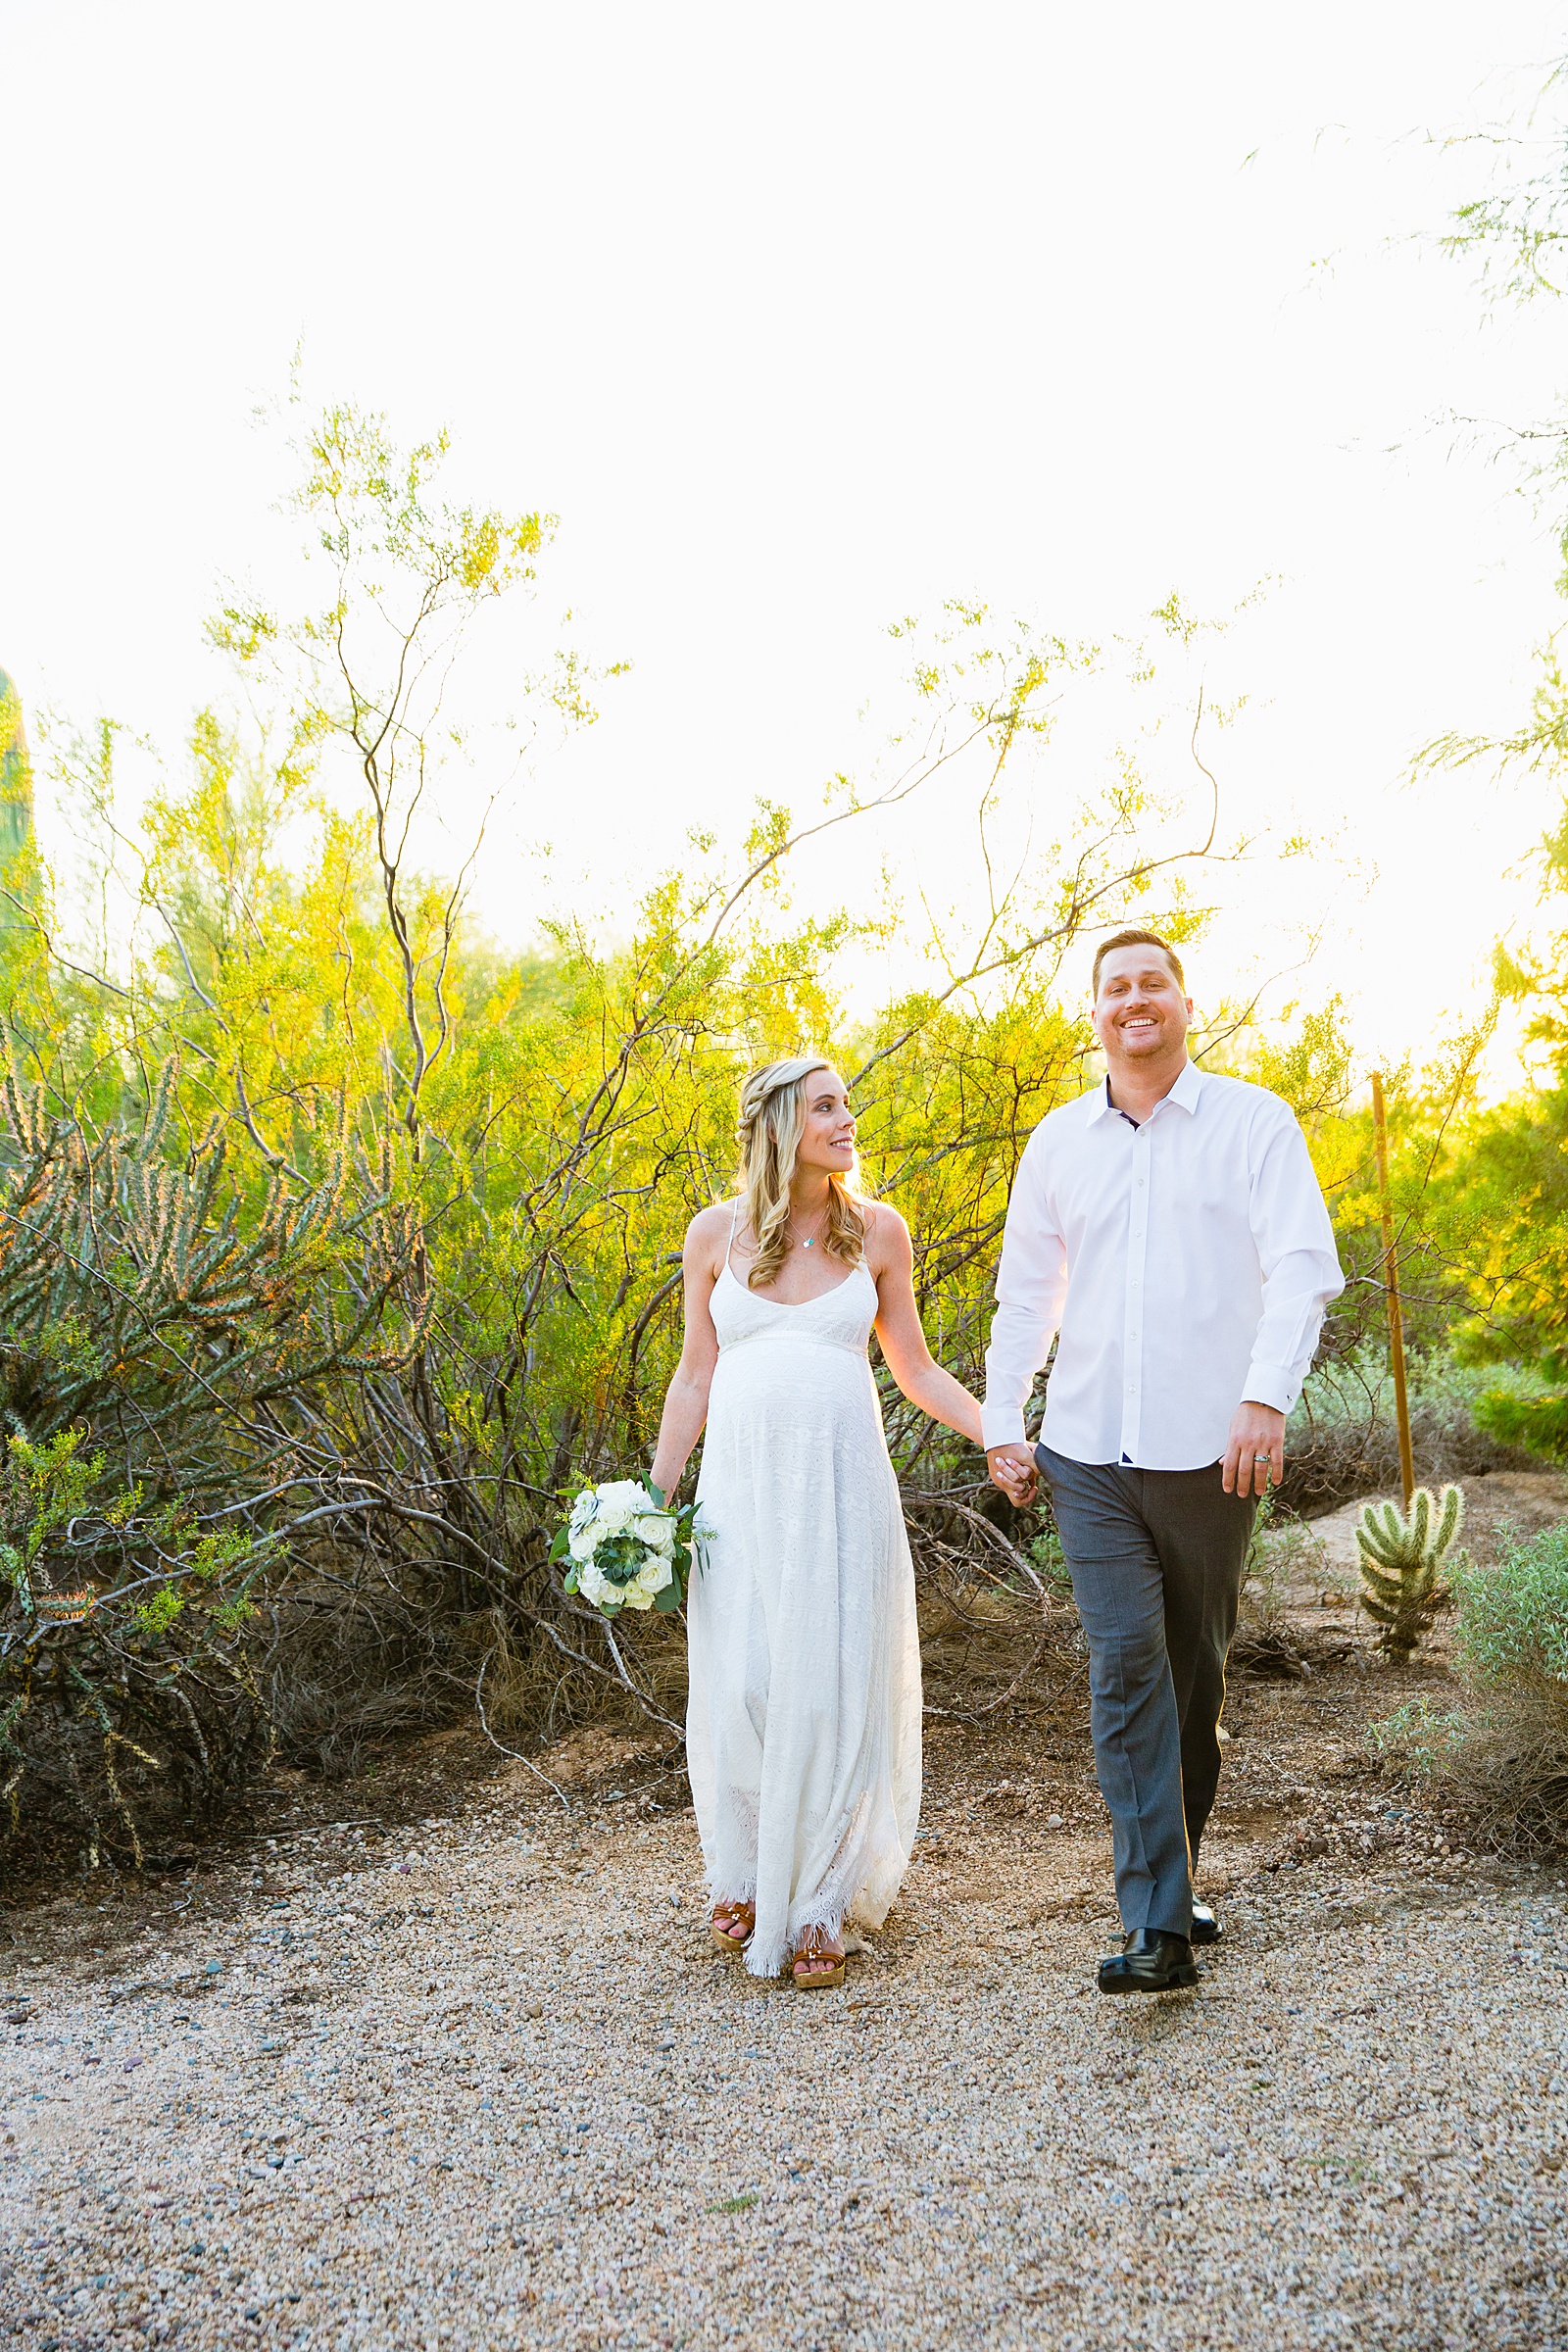 Bride and Groom walking together during their desert backyard elopement in Scottsdale by Arizona wedding photographer PMA Photography.